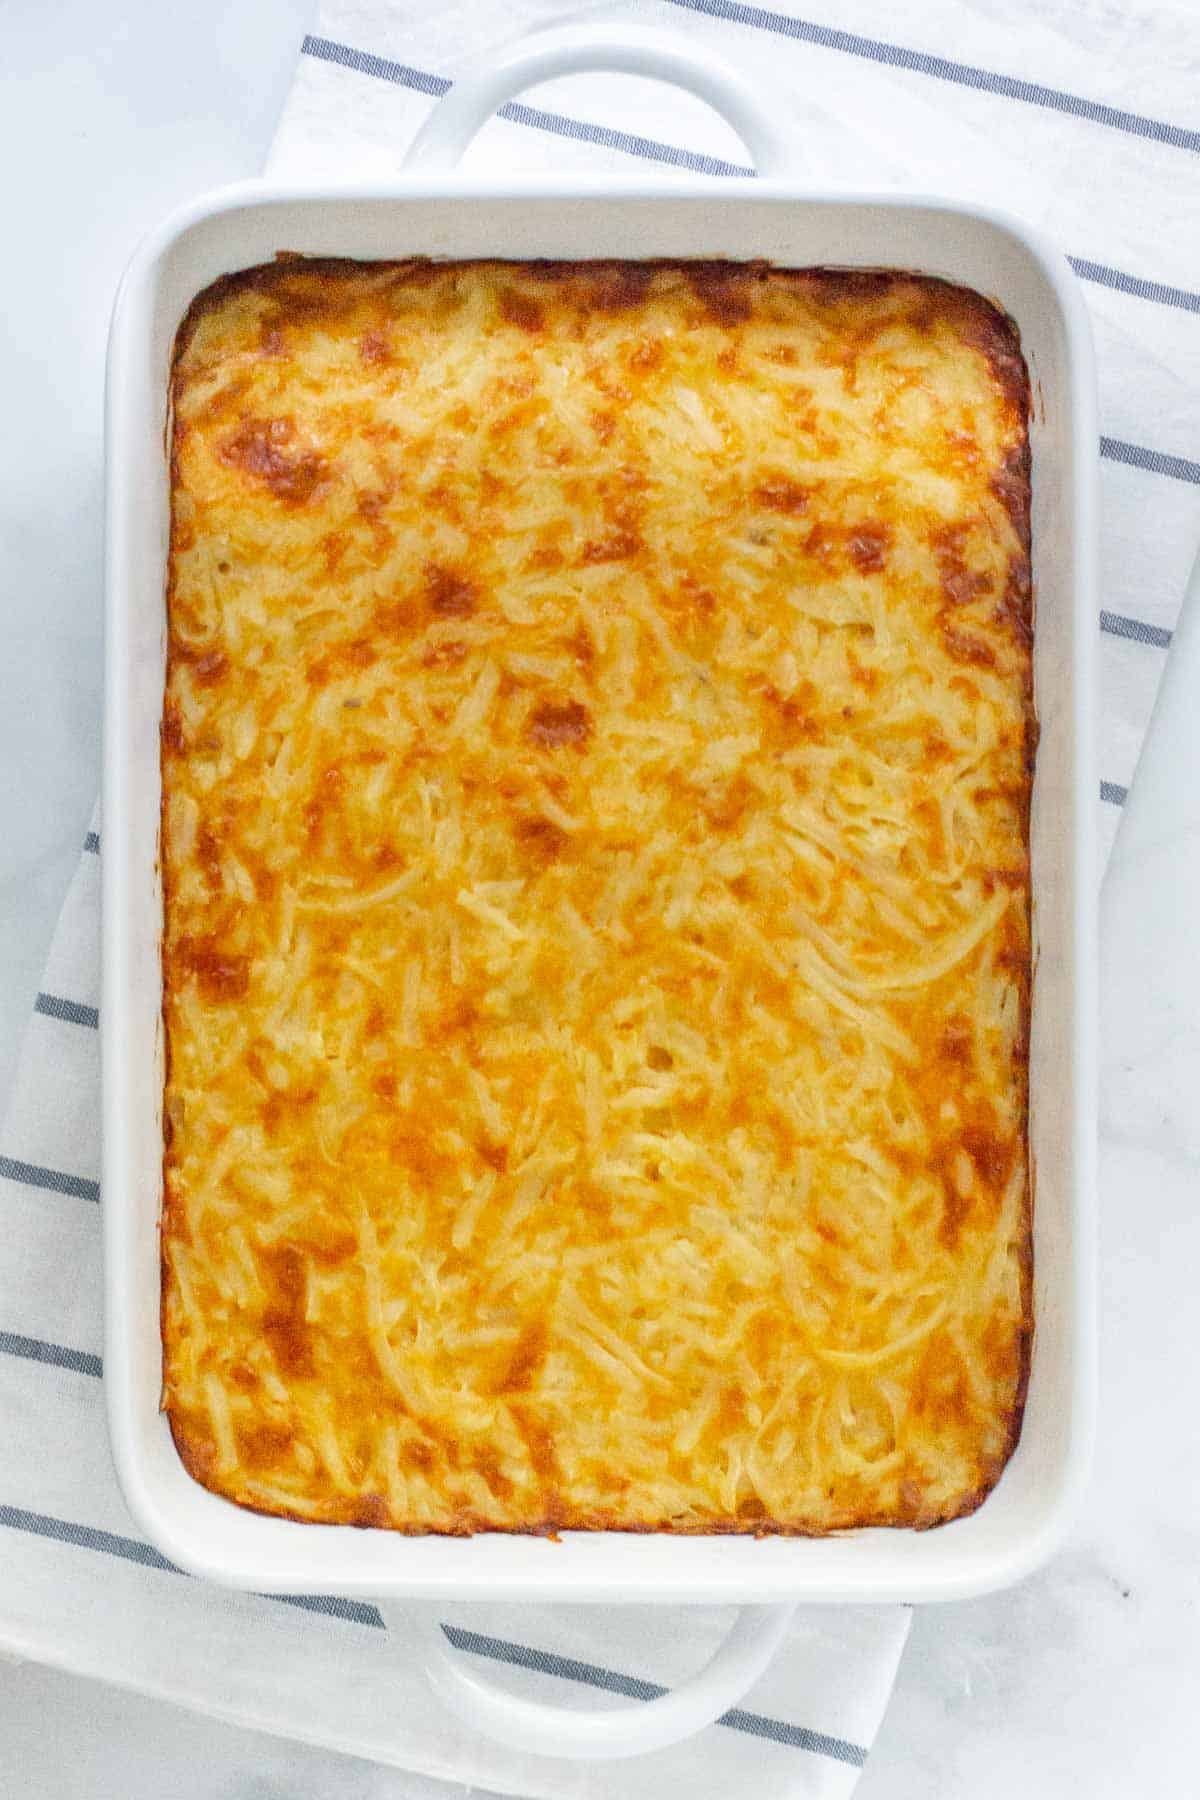 rectangle casserole dish with baked hashbrown casserole.